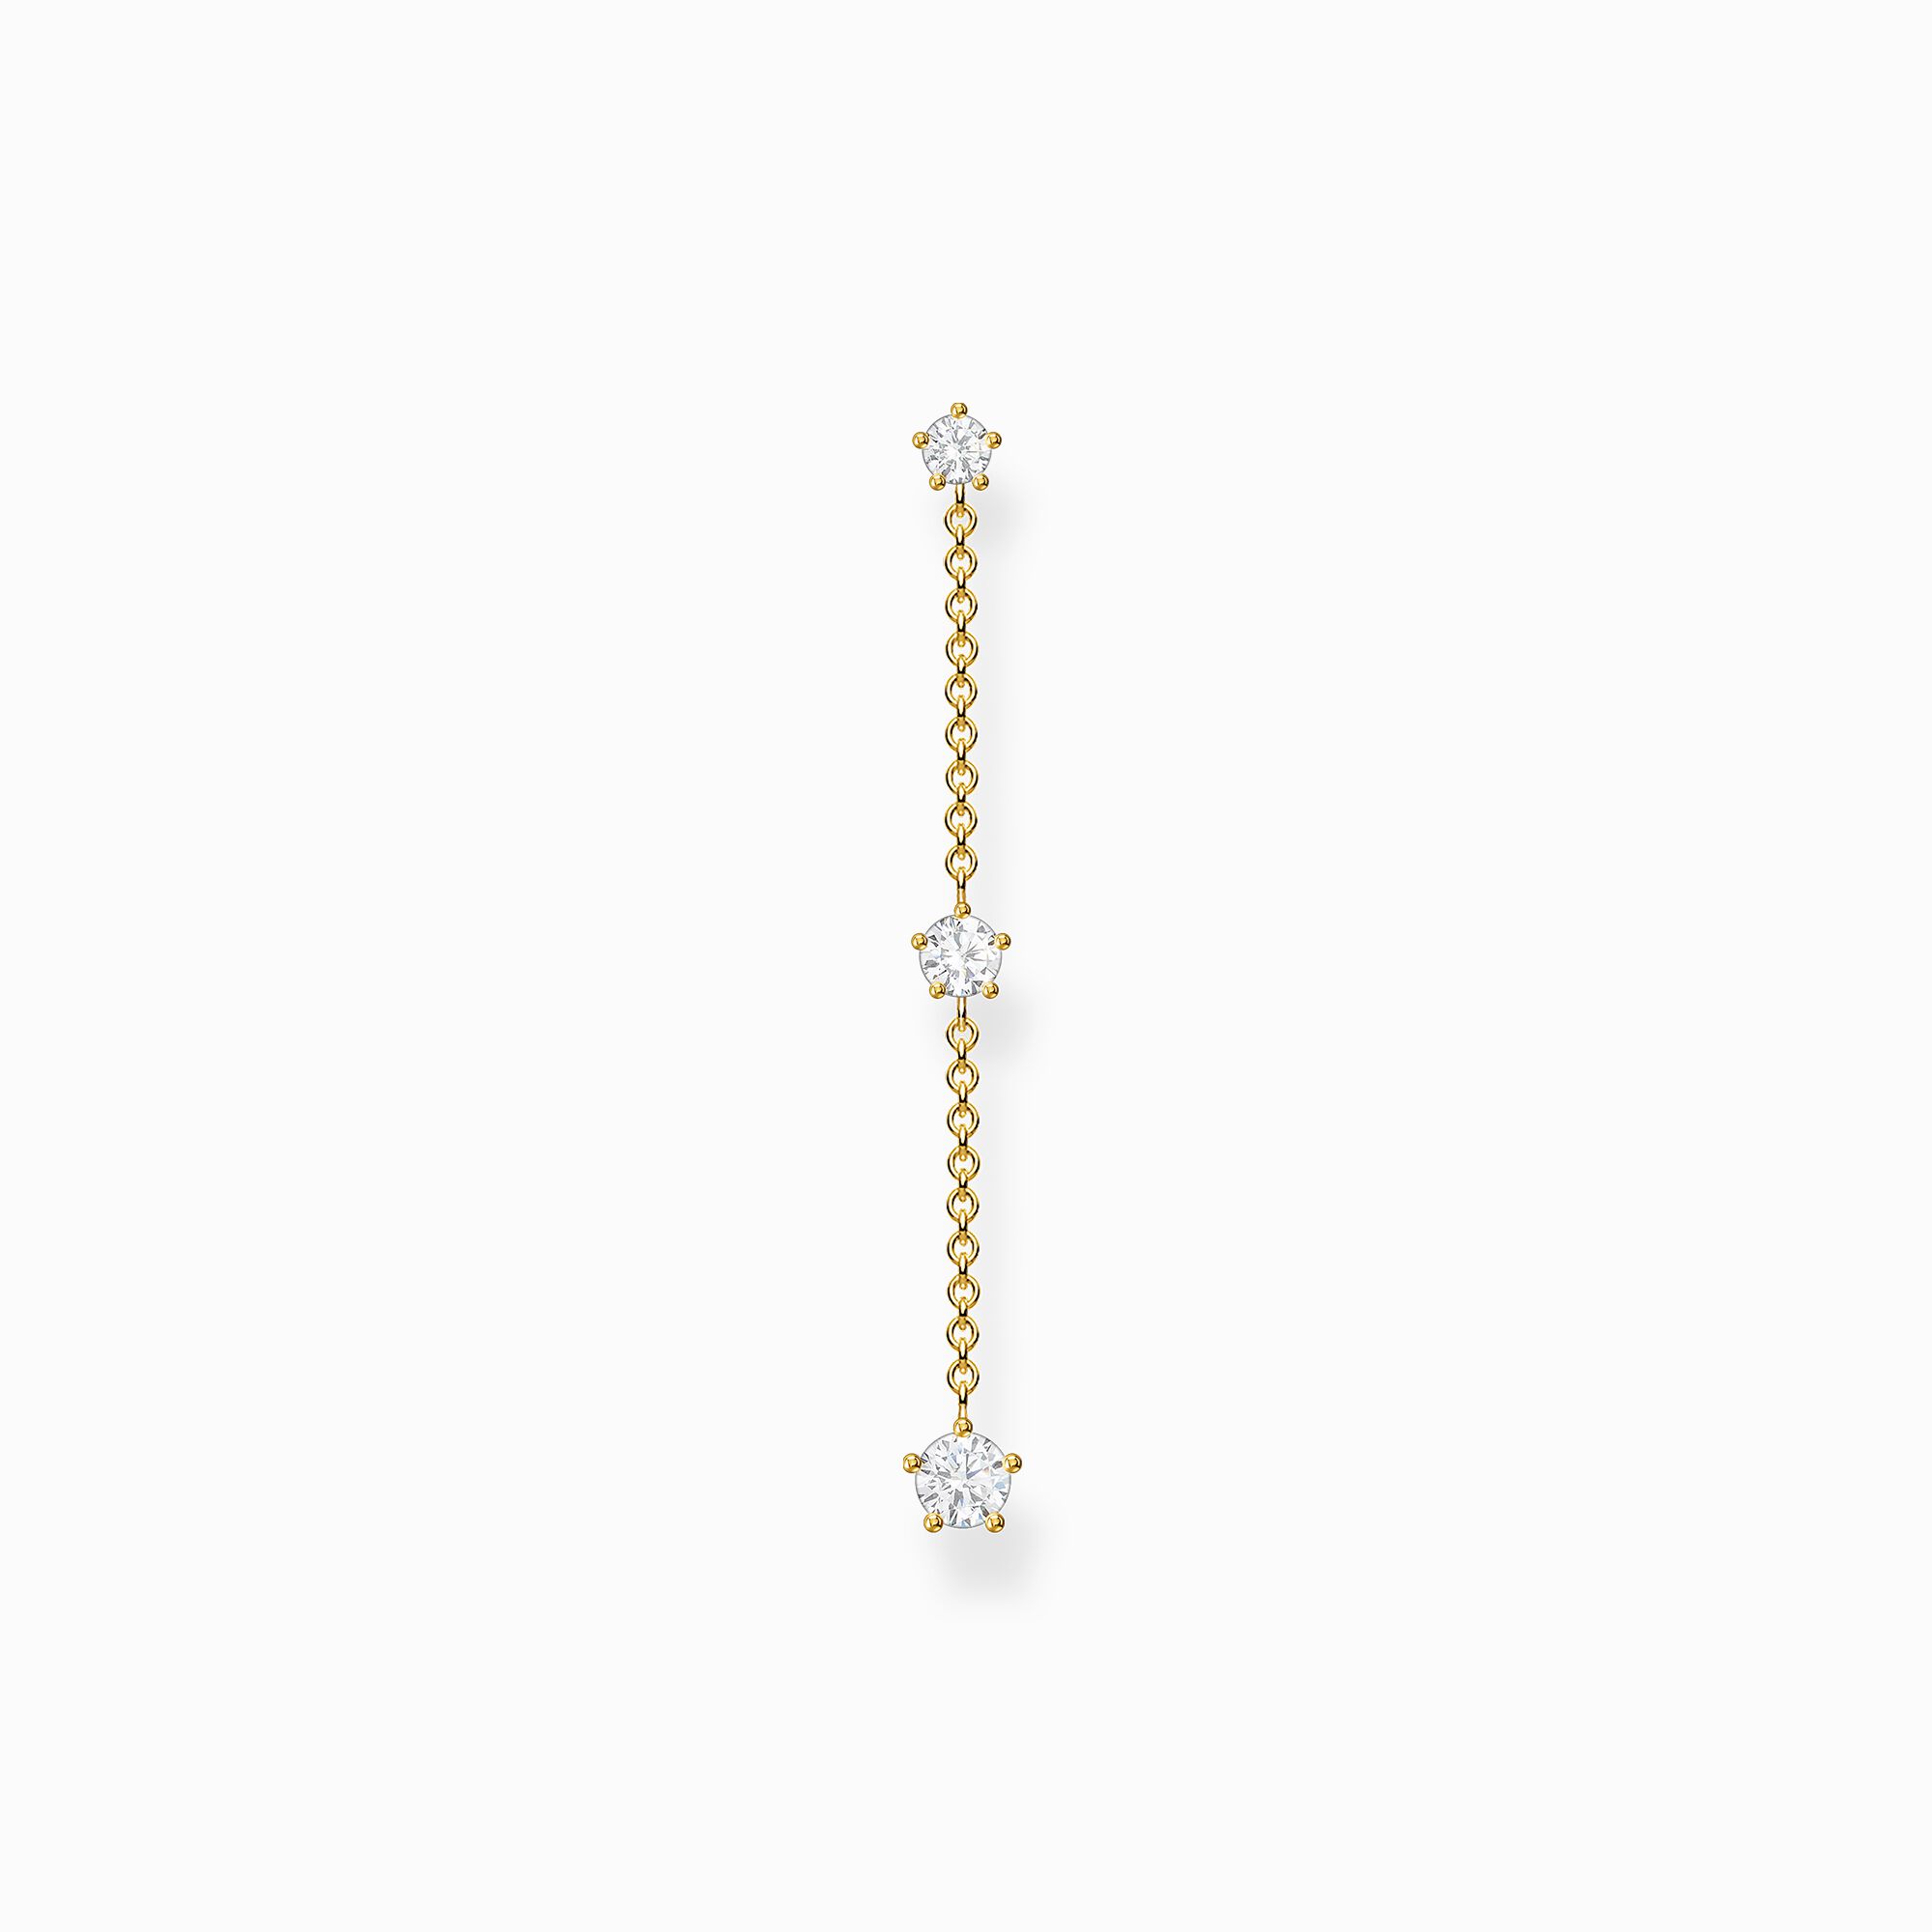 Single earring white stones gold from the Charming Collection collection in the THOMAS SABO online store